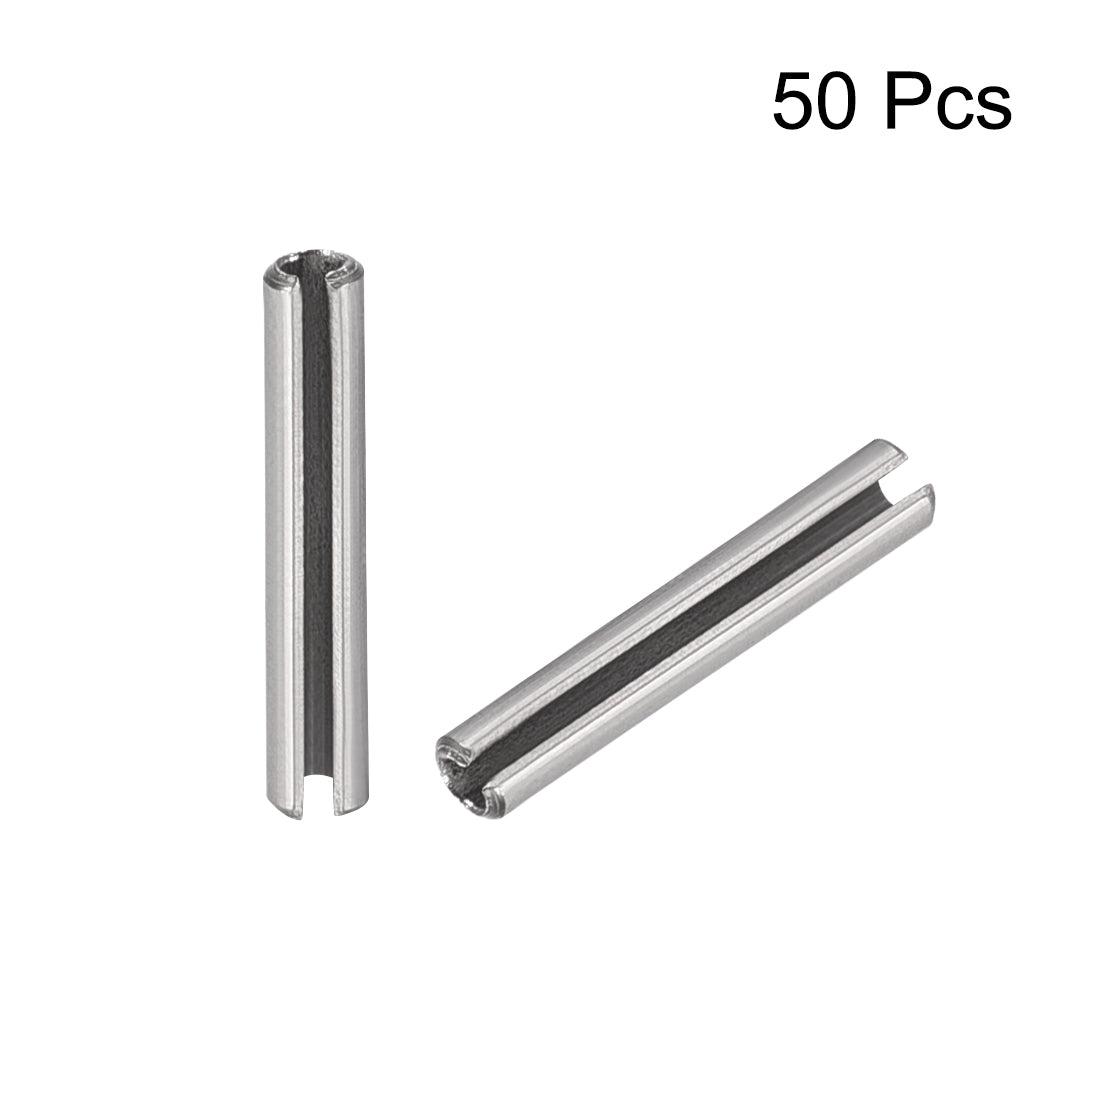 Uxcell Uxcell M3 x 35mm 304 Stainless Steel Split Spring Roll Dowel Pins Plain Finish 50Pcs